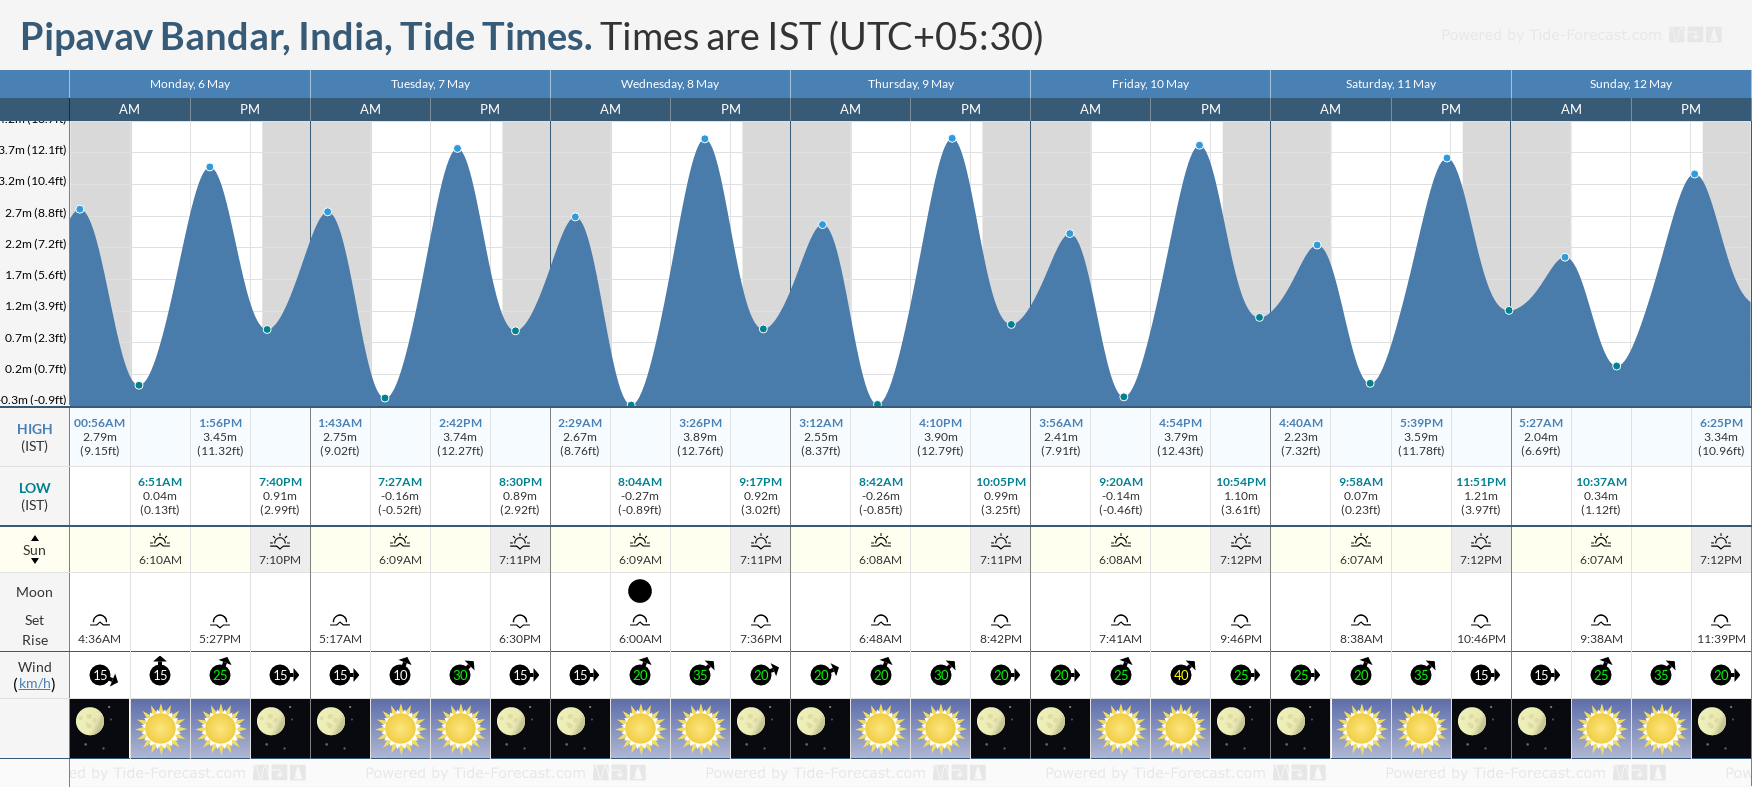 Pipavav Bandar, India Tide Chart including high and low tide tide times for the next 7 days